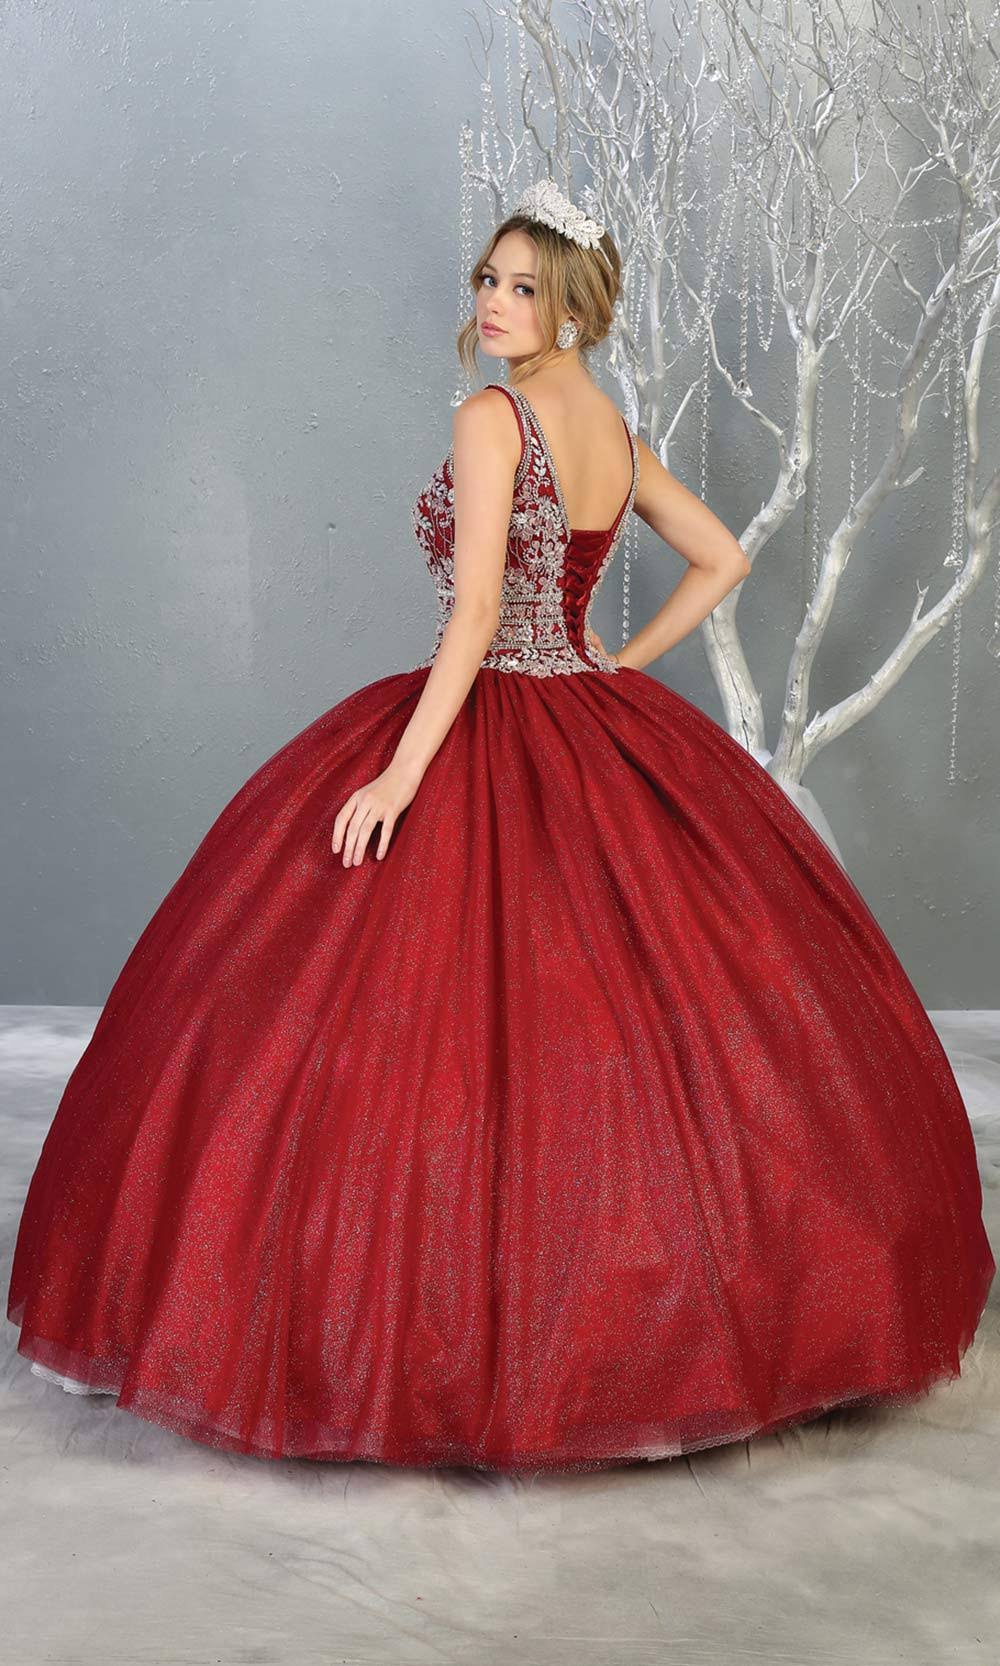 Mayqueen LK143 burgundy red quinceanera ball gown w_ wide st-b